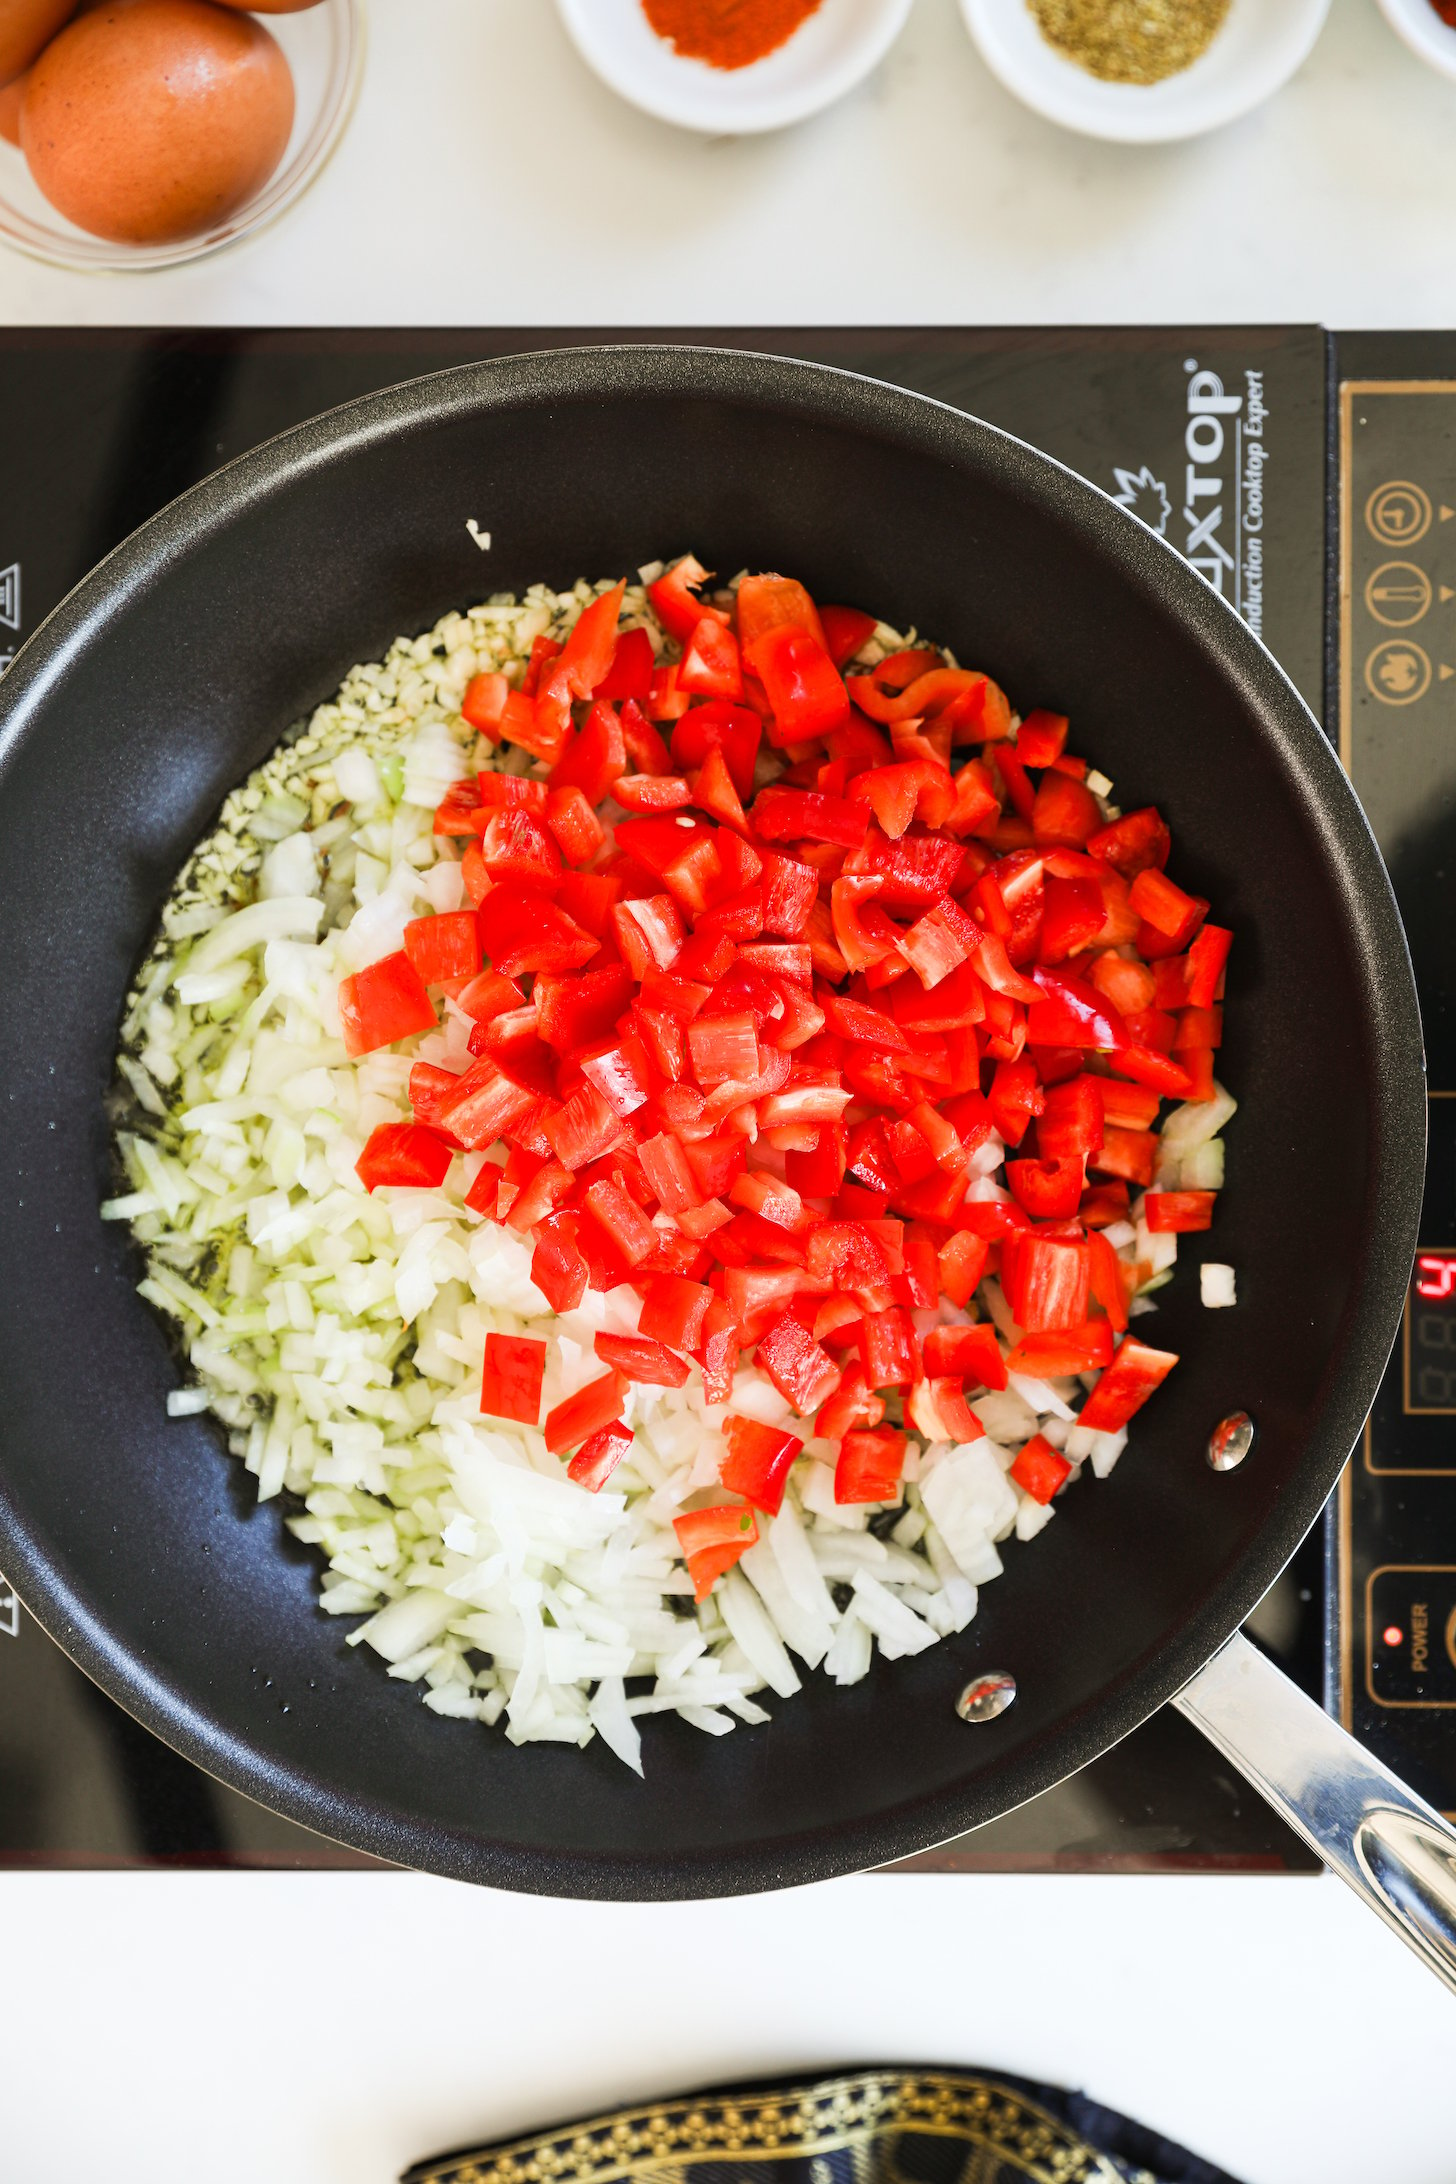 An image of a cooking pan with freshly chopped red peppers and onions placed on a mobile stovetop.